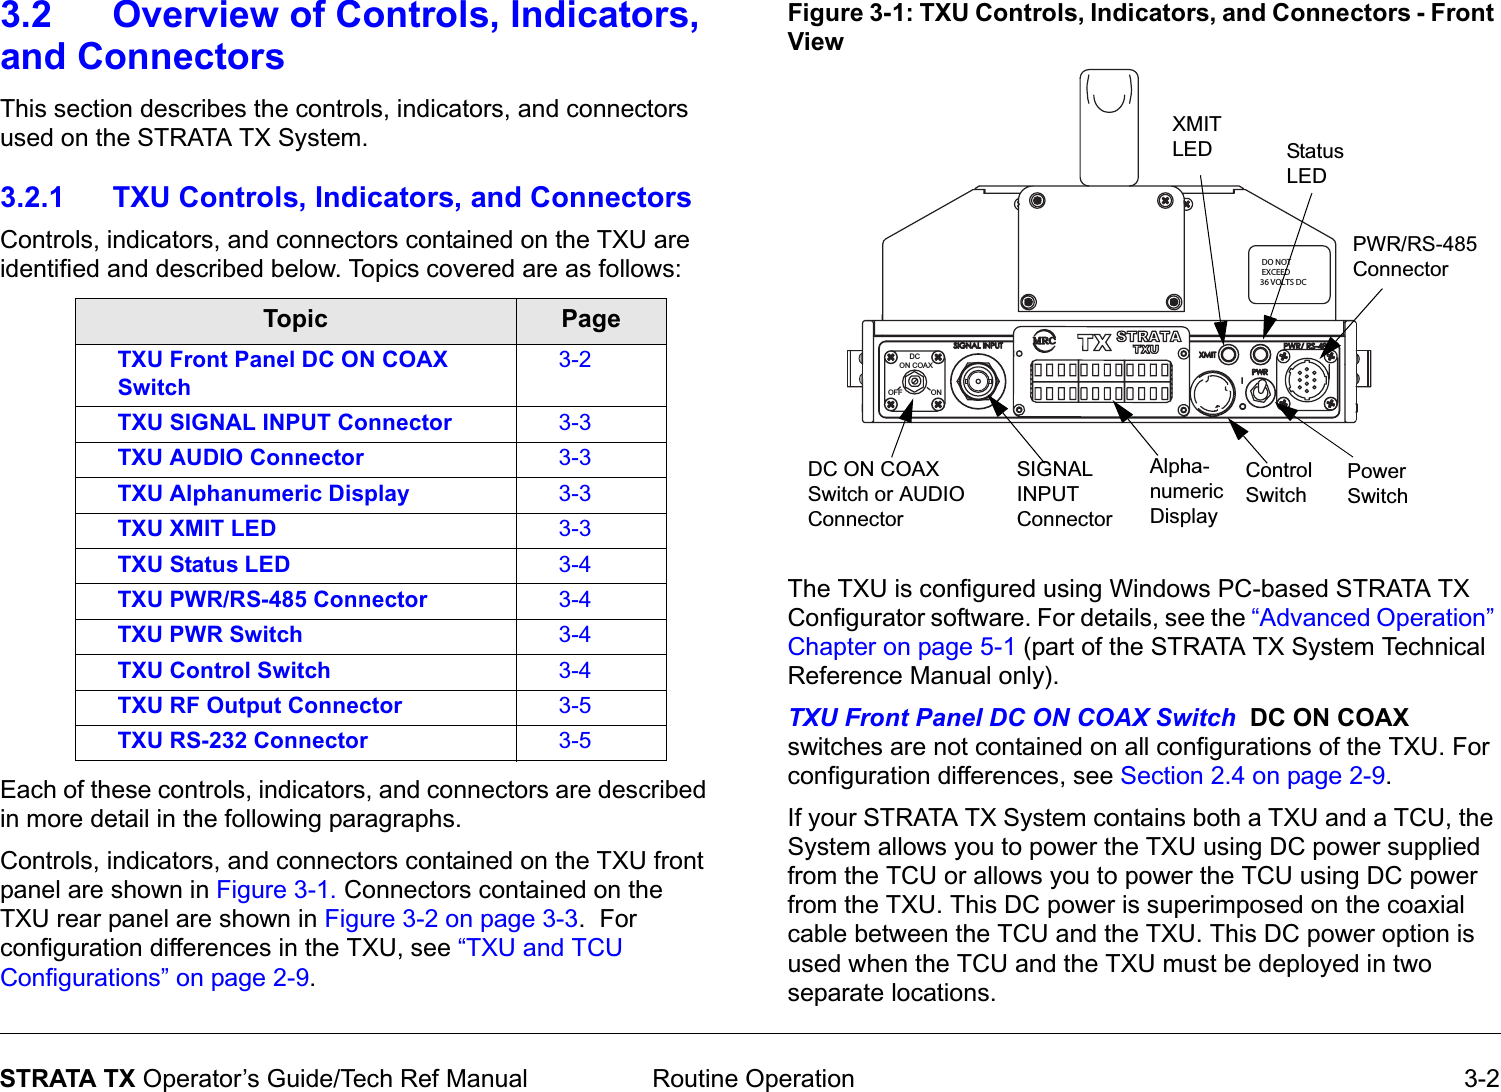  Routine Operation 3-2STRATA TX Operator’s Guide/Tech Ref Manual3.2 Overview of Controls, Indicators, and Connectors This section describes the controls, indicators, and connectors used on the STRATA TX System. 3.2.1 TXU Controls, Indicators, and ConnectorsControls, indicators, and connectors contained on the TXU are identified and described below. Topics covered are as follows:  Each of these controls, indicators, and connectors are described in more detail in the following paragraphs. Controls, indicators, and connectors contained on the TXU front panel are shown in Figure 3-1. Connectors contained on the TXU rear panel are shown in Figure 3-2 on page 3-3.  For configuration differences in the TXU, see “TXU and TCU Configurations” on page 2-9.Topic PageTXU Front Panel DC ON COAX Switch3-2TXU SIGNAL INPUT Connector 3-3TXU AUDIO Connector 3-3TXU Alphanumeric Display 3-3TXU XMIT LED 3-3TXU Status LED 3-4TXU PWR/RS-485 Connector 3-4TXU PWR Switch 3-4TXU Control Switch 3-4TXU RF Output Connector 3-5TXU RS-232 Connector 3-5Figure 3-1: TXU Controls, Indicators, and Connectors - Front ViewThe TXU is configured using Windows PC-based STRATA TX Configurator software. For details, see the “Advanced Operation” Chapter on page 5-1 (part of the STRATA TX System Technical Reference Manual only). TXU Front Panel DC ON COAX Switch  DC ON COAX switches are not contained on all configurations of the TXU. For configuration differences, see Section 2.4 on page 2-9.If your STRATA TX System contains both a TXU and a TCU, the System allows you to power the TXU using DC power supplied from the TCU or allows you to power the TCU using DC power from the TXU. This DC power is superimposed on the coaxial cable between the TCU and the TXU. This DC power option is used when the TCU and the TXU must be deployed in two separate locations.  DO NOT  EXCEED36 VOLTS DC     DC ON COAXOFF              ONSIGNAL INPUT ConnectorAlpha- numeric DisplayStatus LEDDC ON COAX Switch or AUDIO ConnectorControl SwitchPower SwitchPWR/RS-485 ConnectorXMIT LED